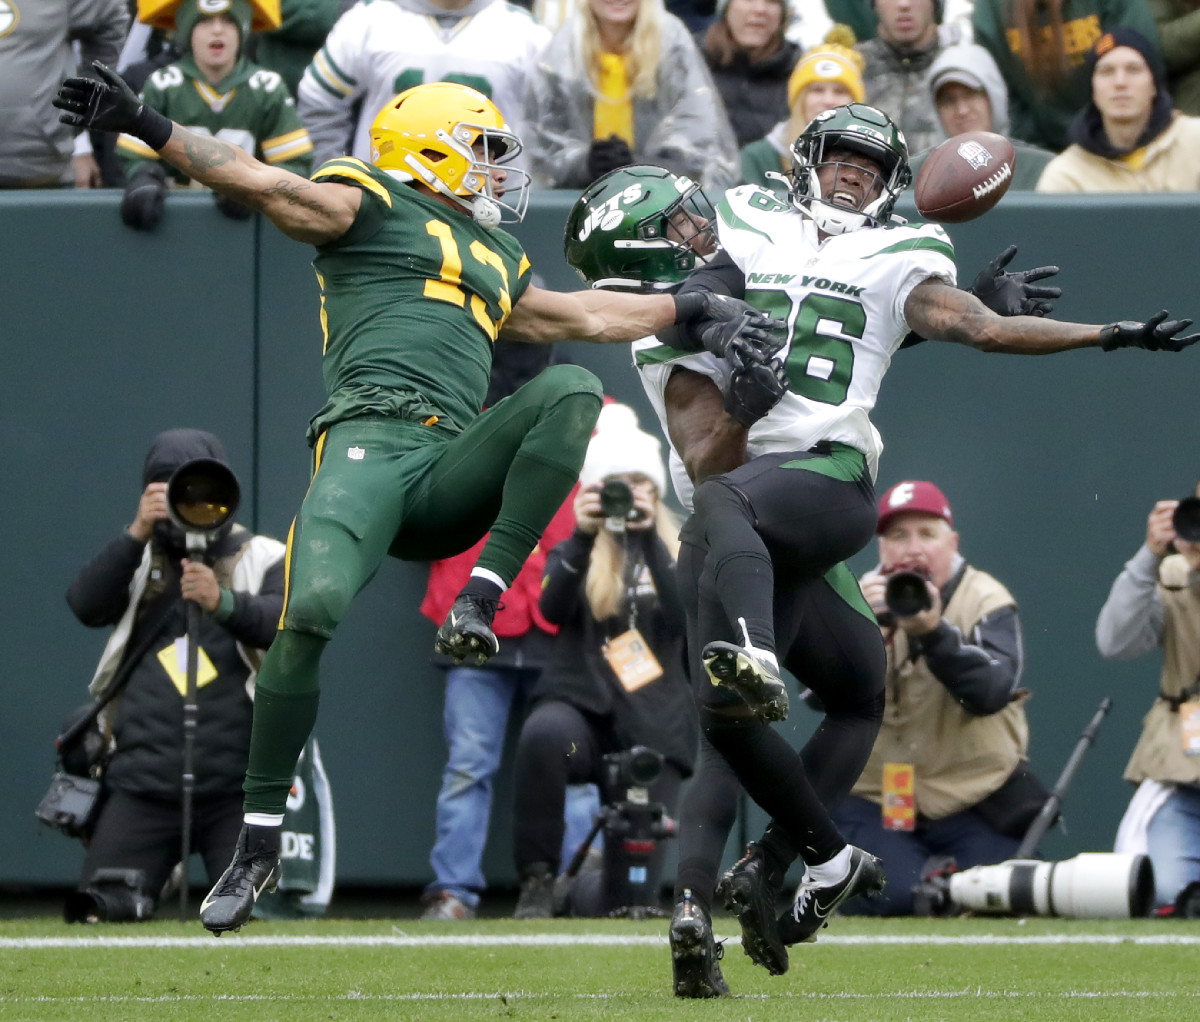 Allen Lazard tries to make a catch between two Jets defenders. (Photo by Wm. Glasheen/USA Today Sports)